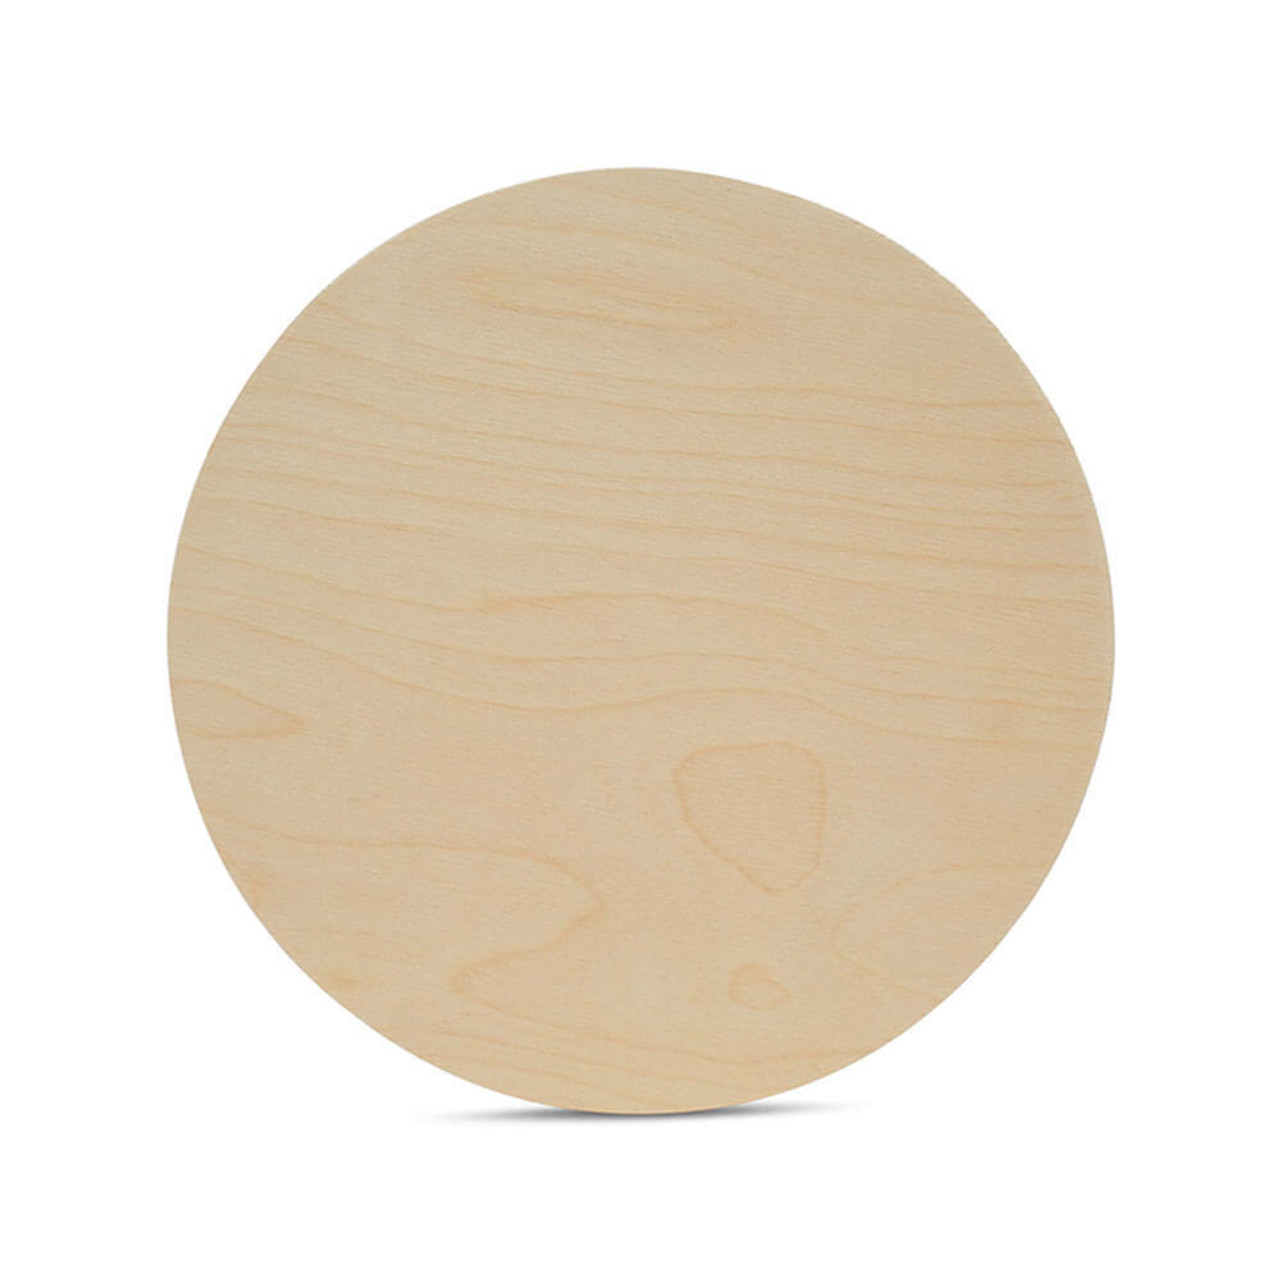  Wood Circles for Crafts, Audab 12 Pack 12 Inch